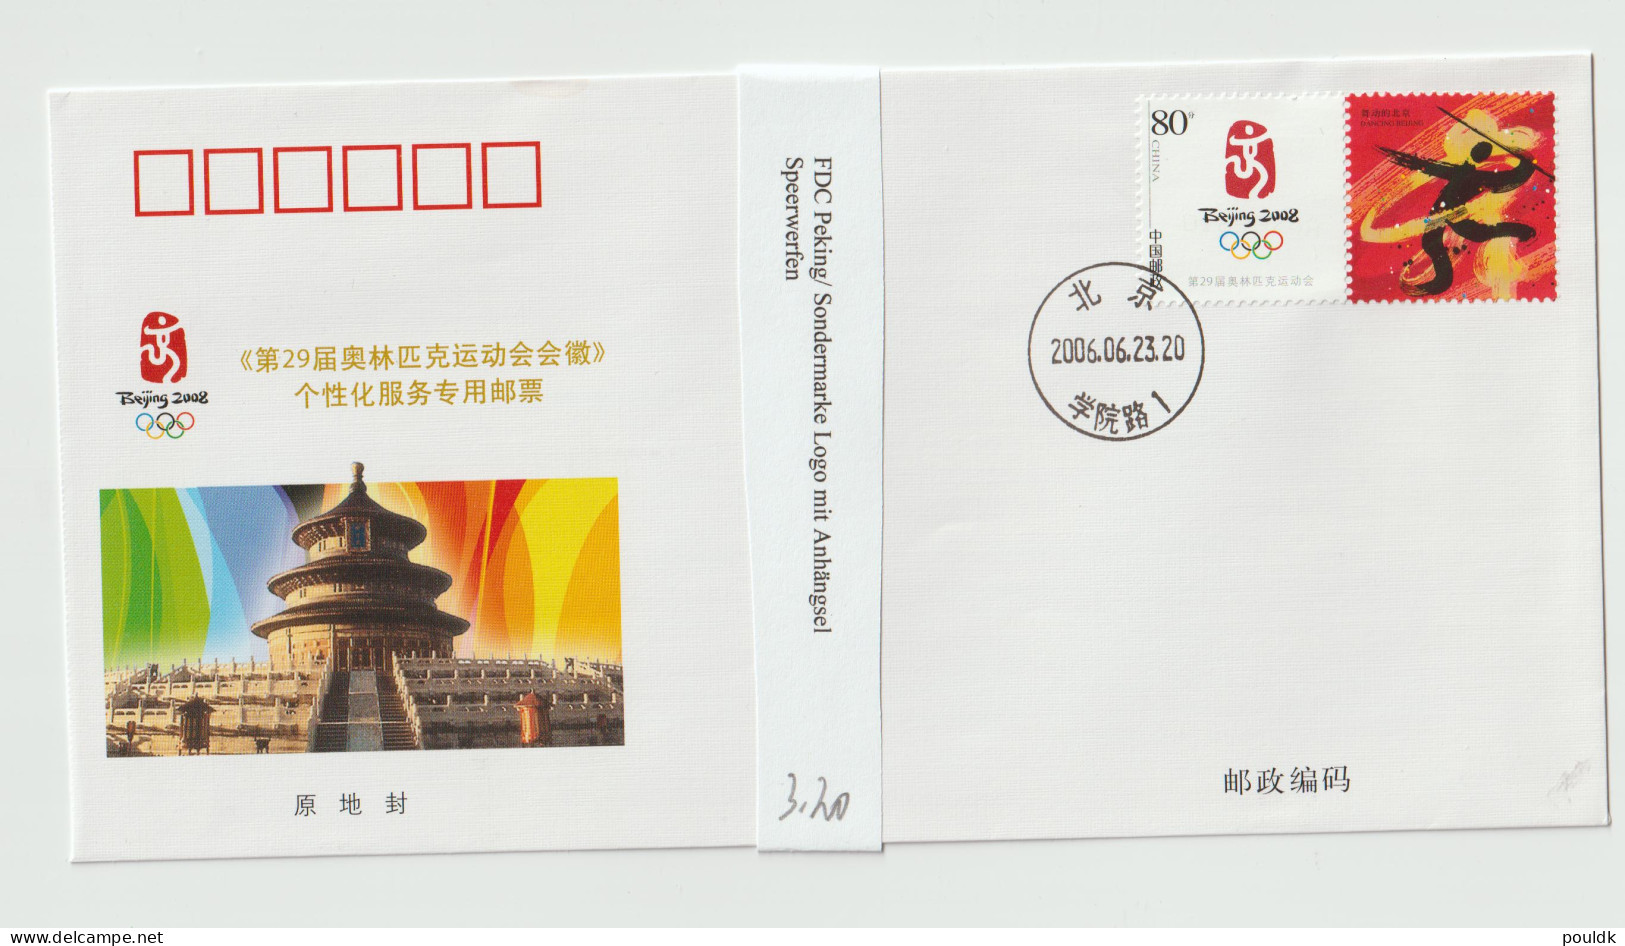 Olympic Games In Beijing 2008 - Cover Commerating Personalized Stamp Of The Emblem To The Games. Postal - Summer 2008: Beijing